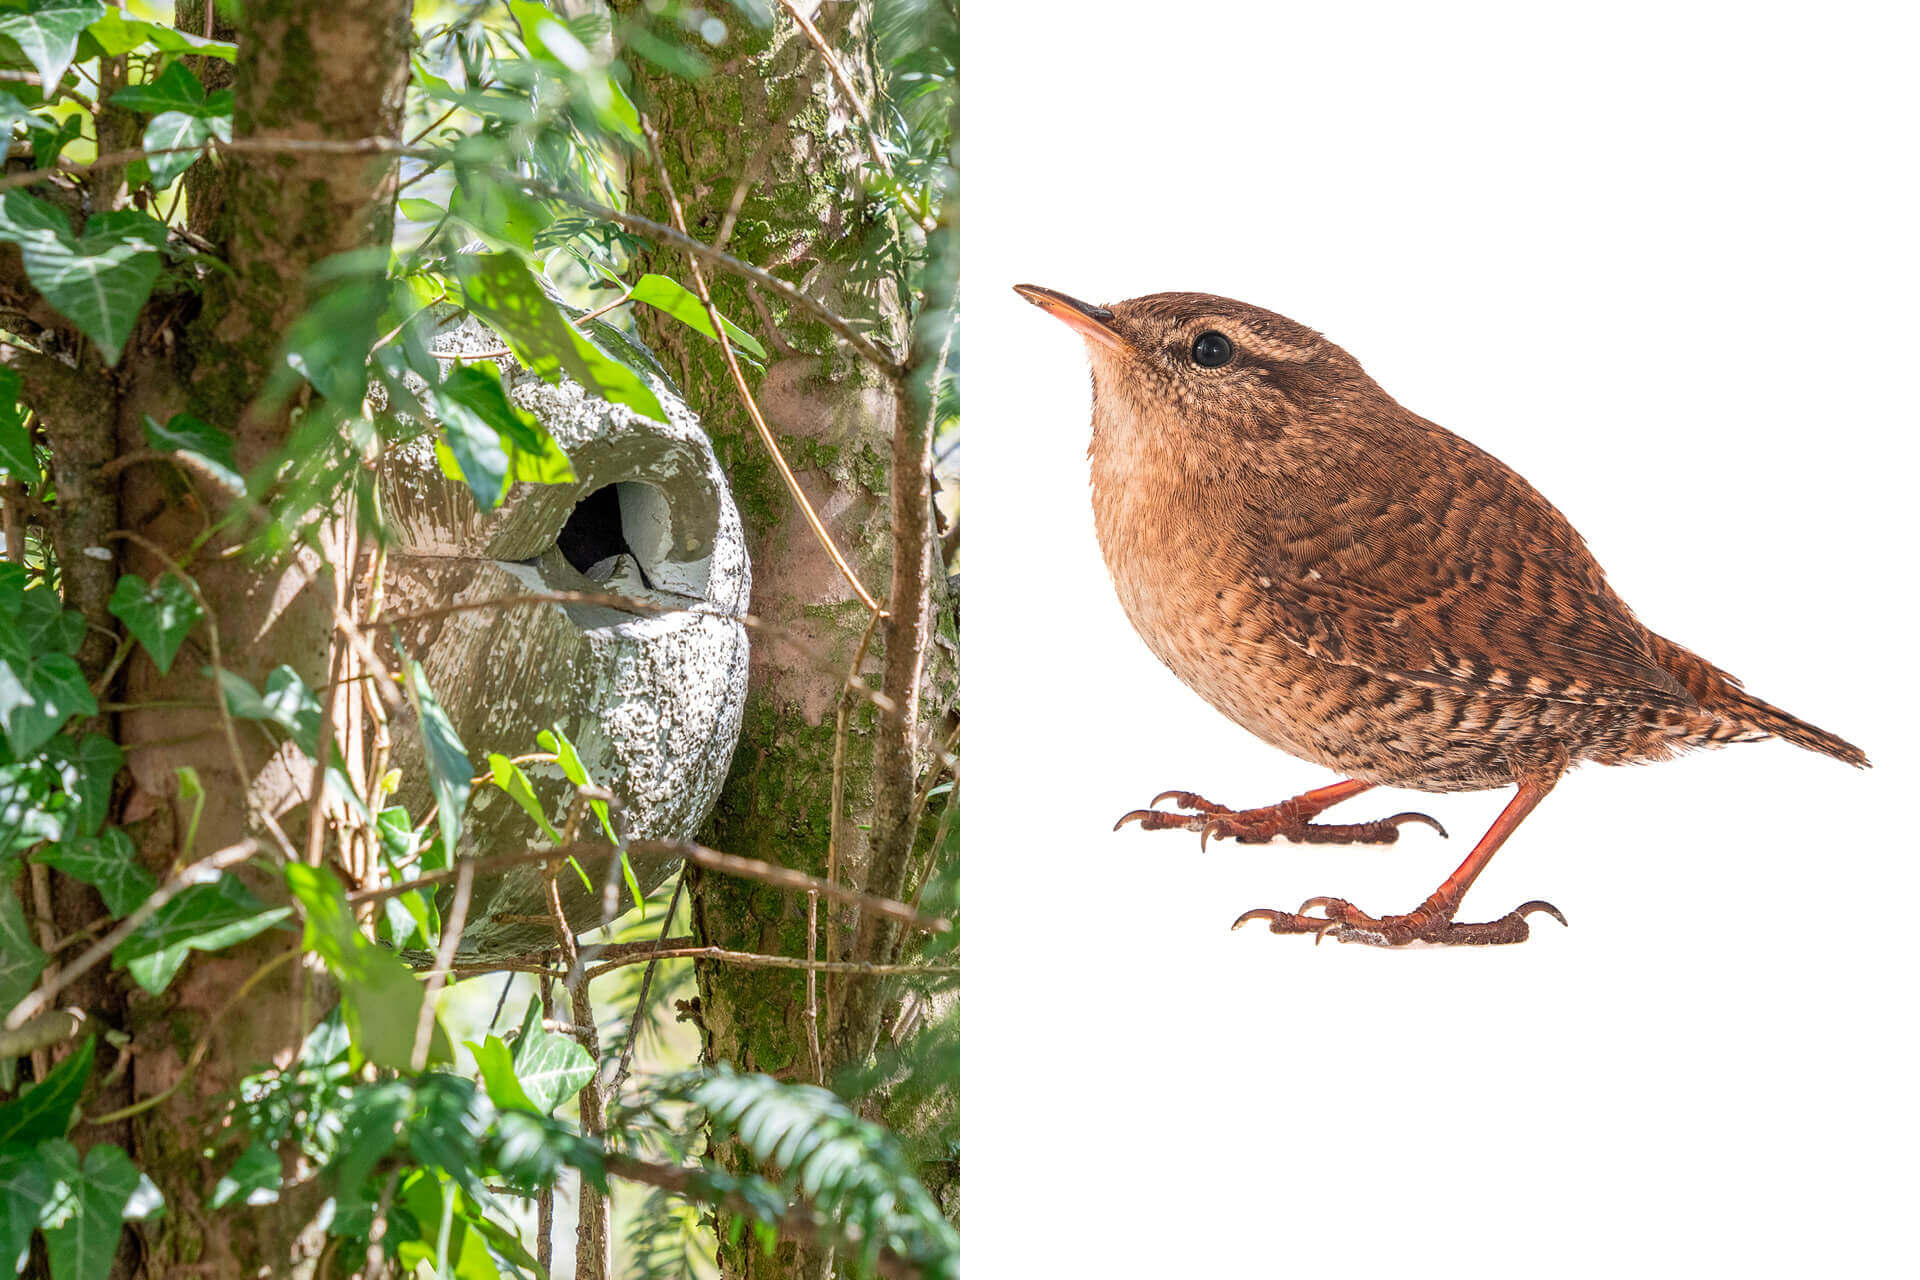 Domes for the Eurasian wren: Eurasian wrens prefer round, closed nesting aids. They use their quarters not only for rearing their young but frequently also as a place to sleep in during the winter.